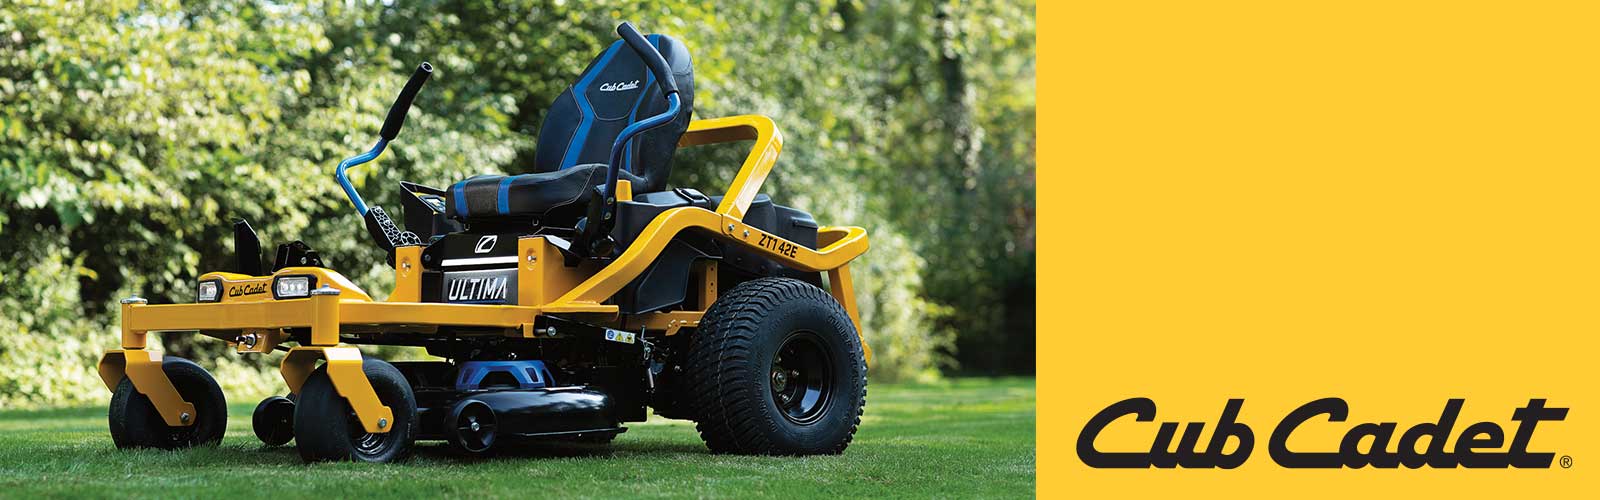 Cub Cadet strong, versatile and reliable zero-turn ride-on mowers to help maintain large area lawns